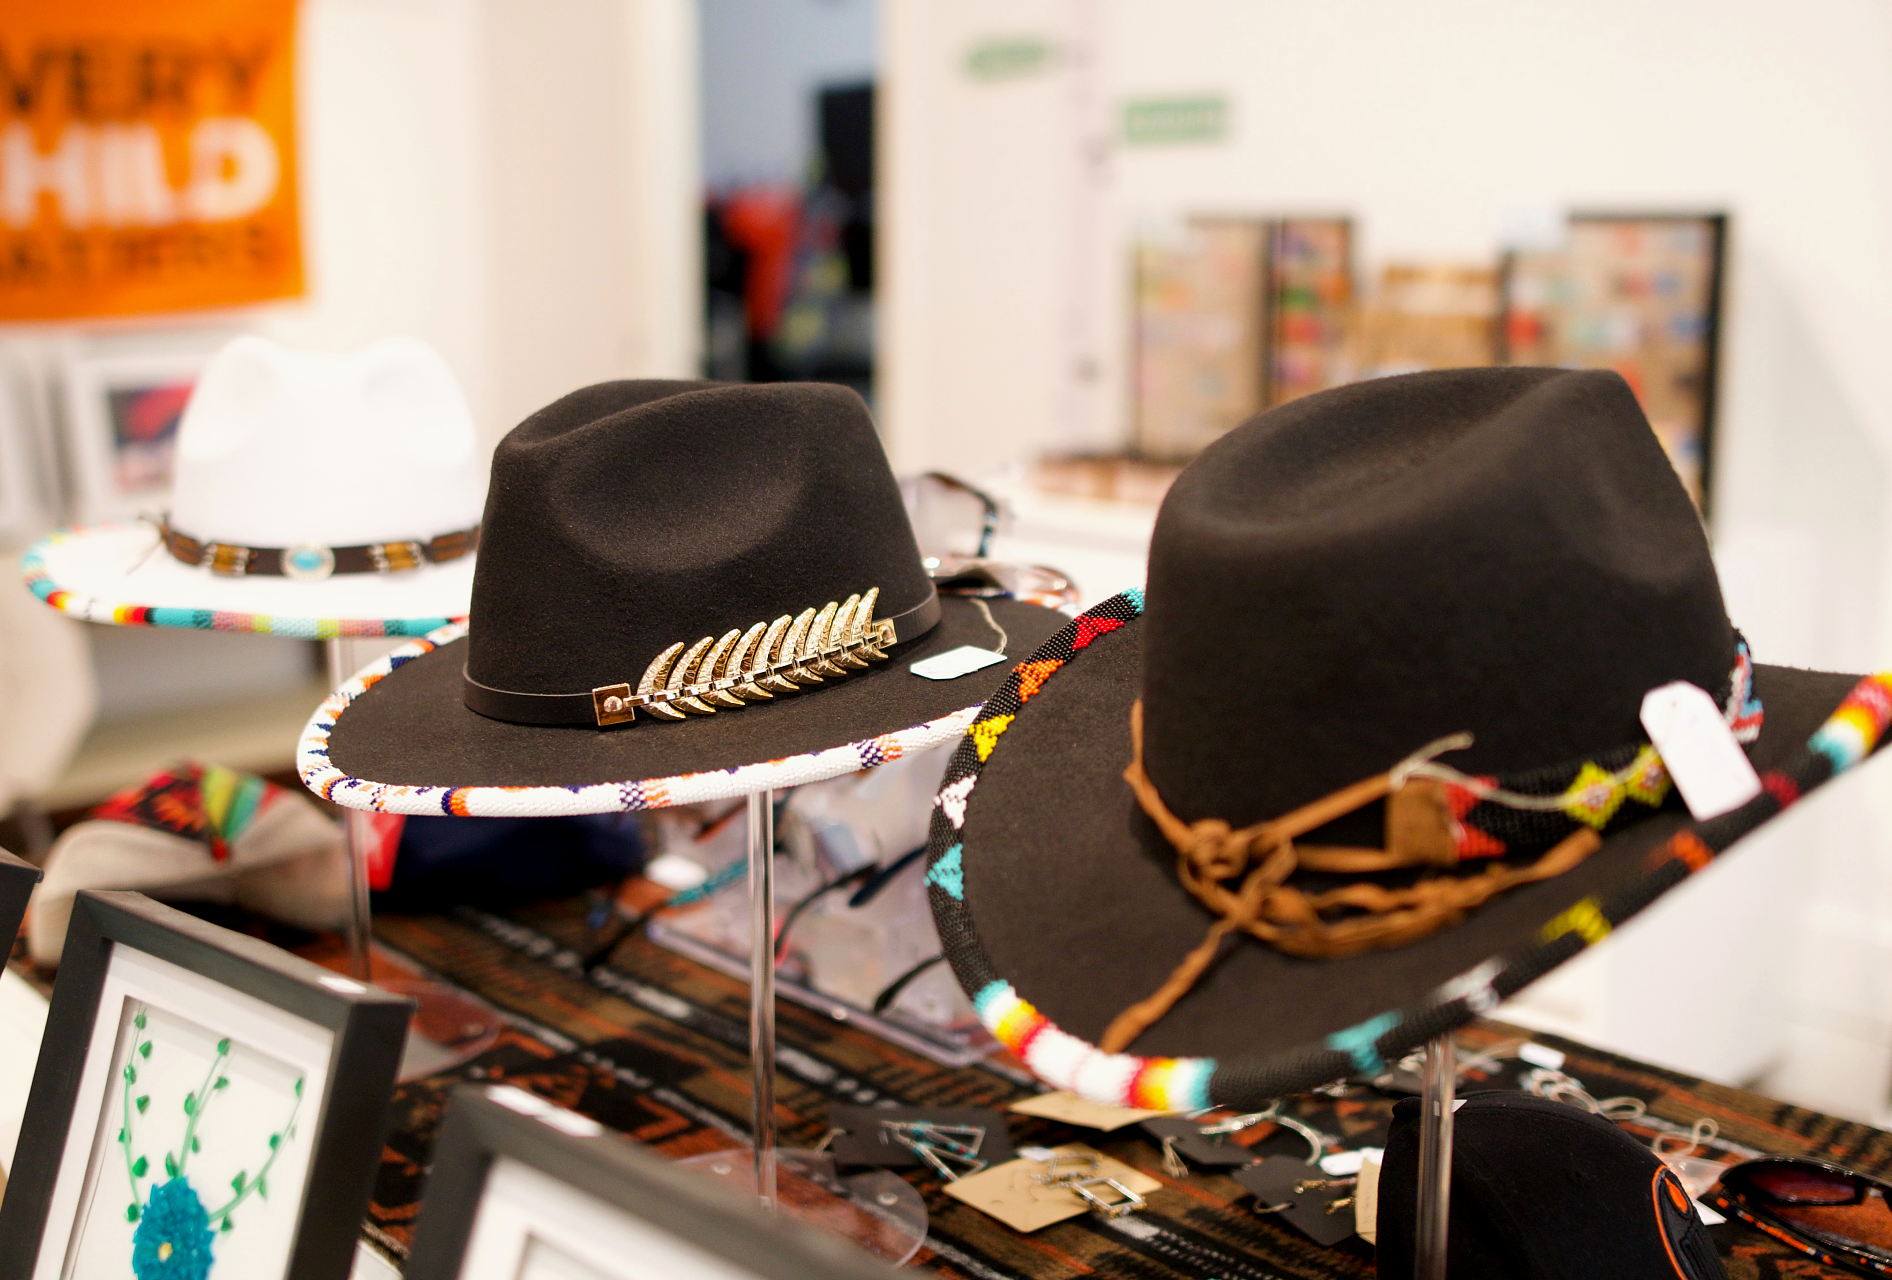 Indigenous style hats on display